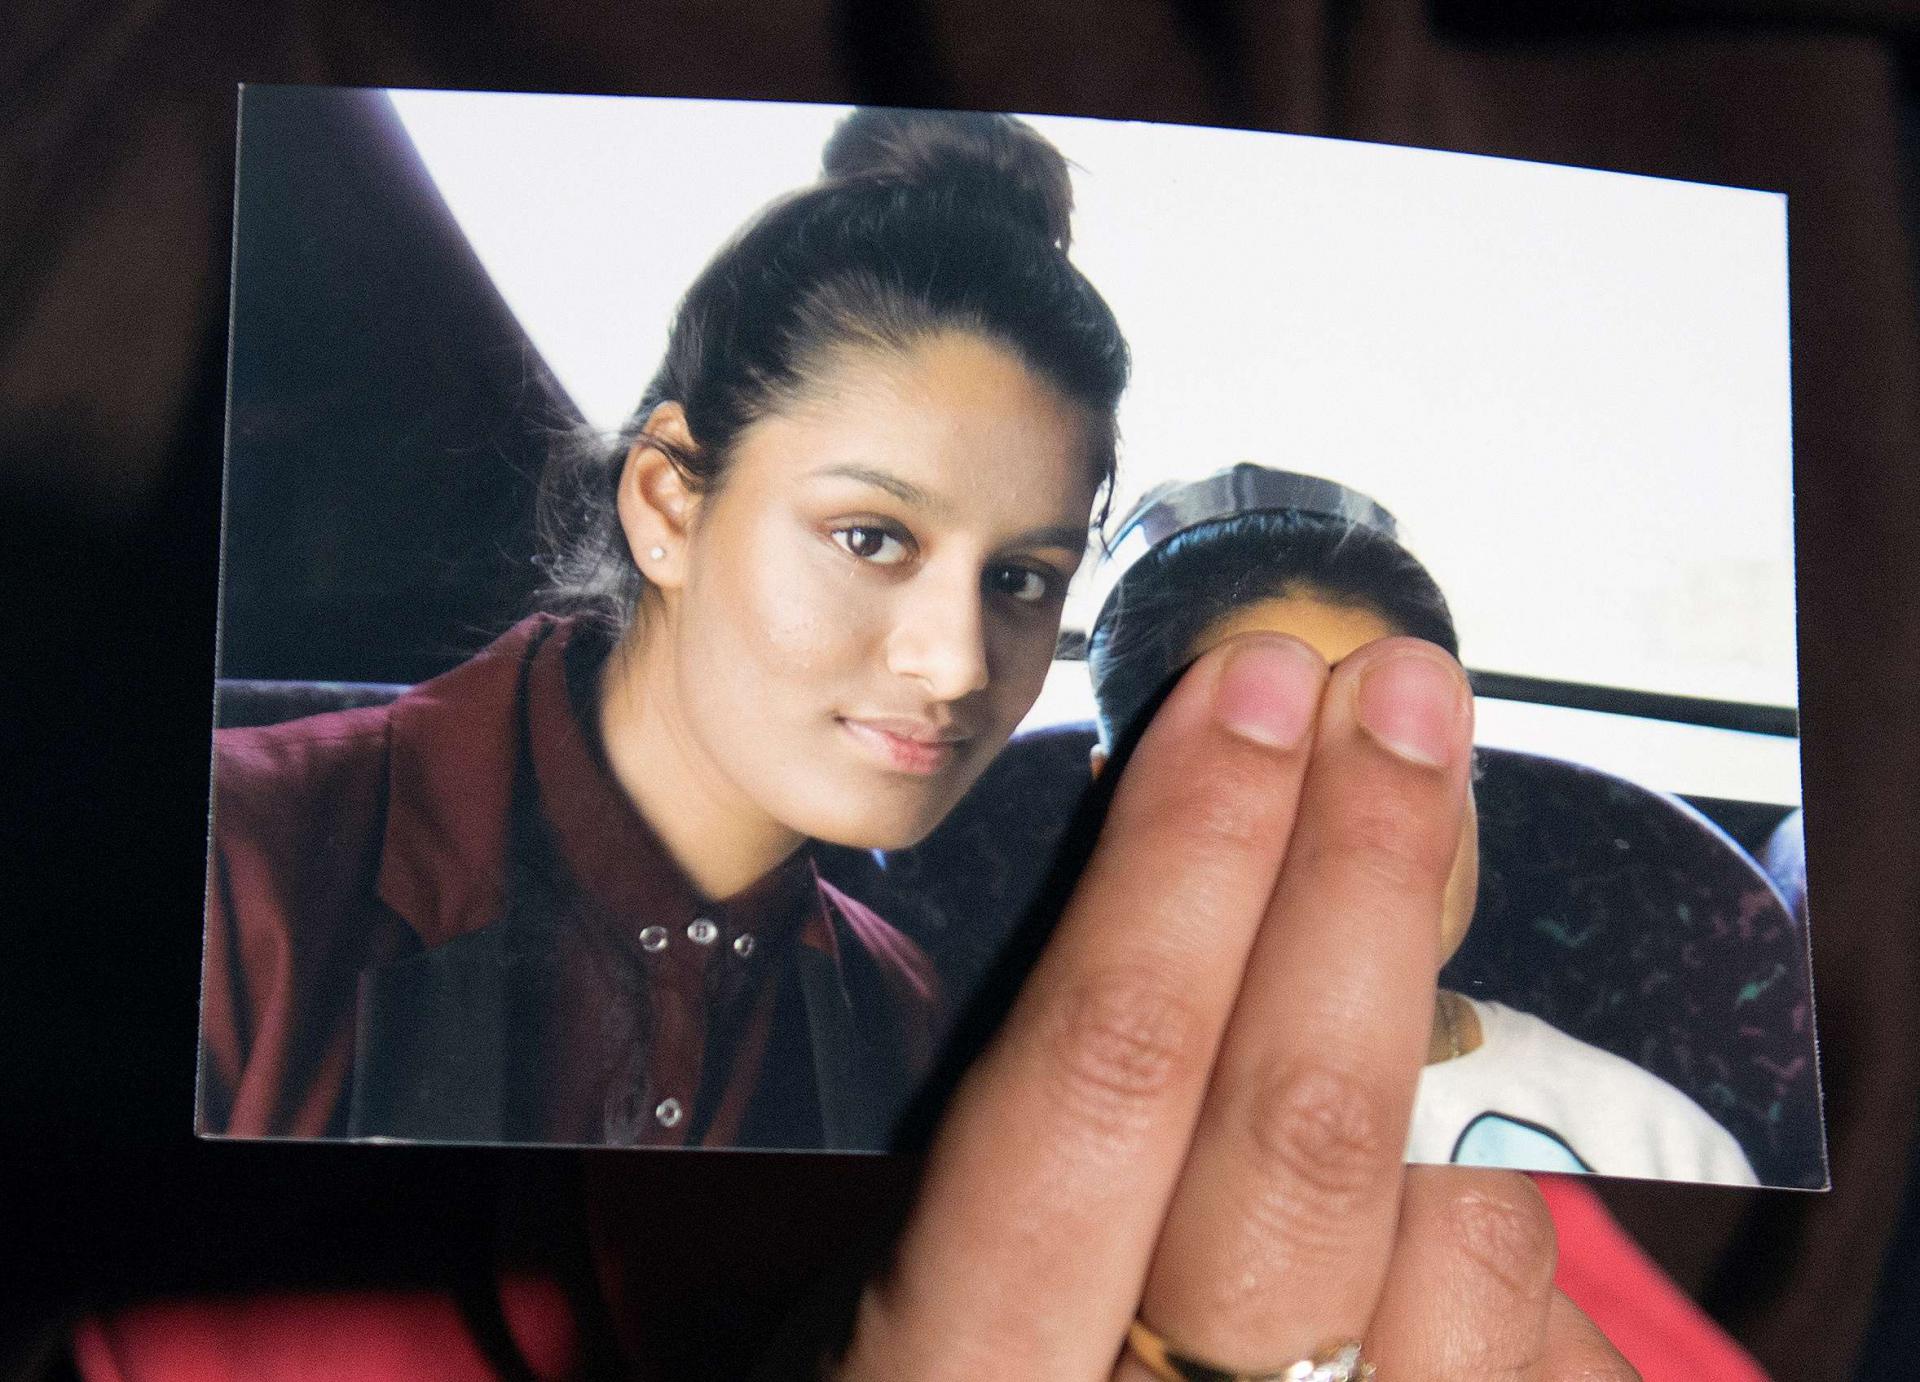 Renu Begum, sister of teenage British girl Shamima Begum, holds a photo of her sister as she makes an appeal for her to return home at Scotland Yard, in London, Britain February 22, 2015.